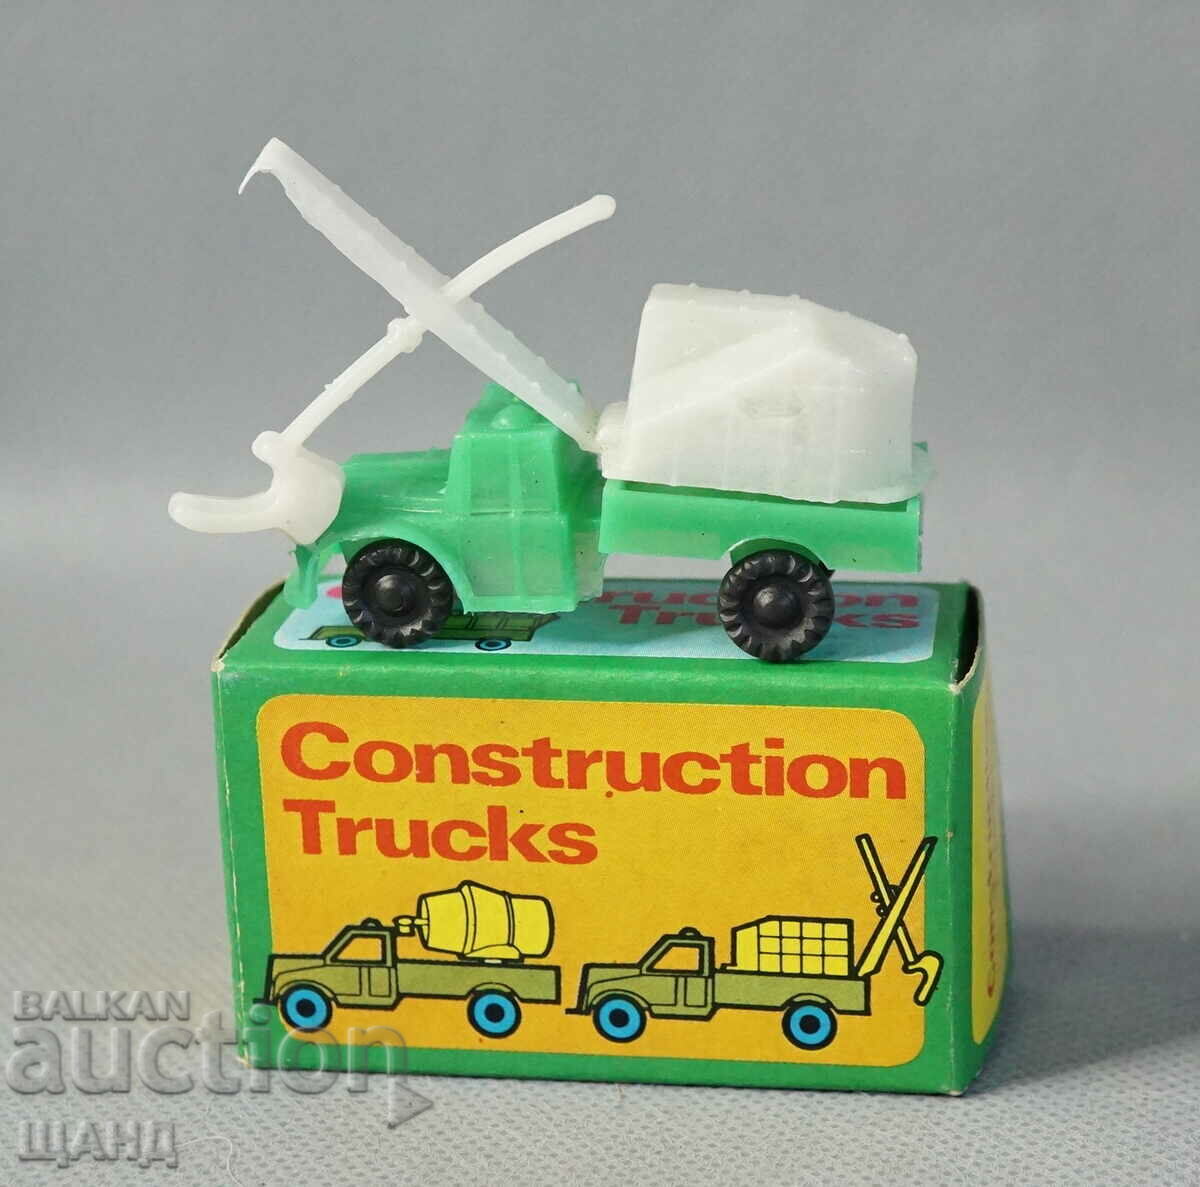 Old Soc plastic toy model truck excavator with box